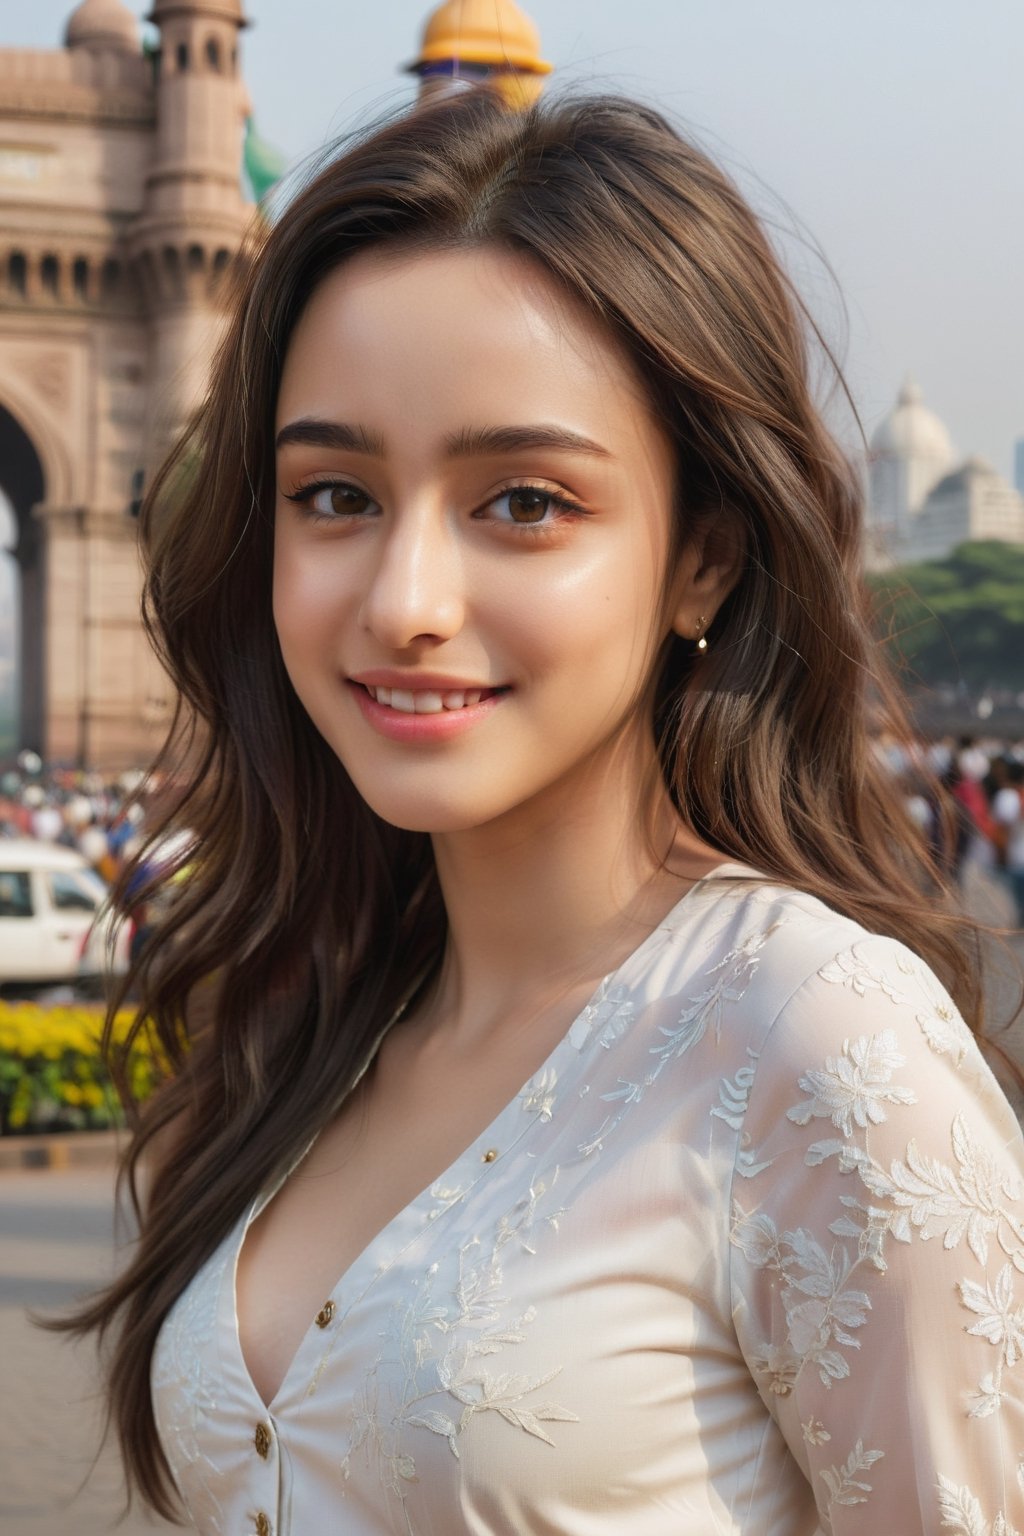 young woman face features like (shraddha kapoor),oval face ,(smaller forehead),cute, ((white skin)), having walk in mumbai in front of gateway of india wearing pants , rich detailed complex background, detail facial features, focus on skin texture, detailed hairs, natural look, hands in air, pose, hands,wearing sexy dress, candid moments, ((POV subject facing back to camera)), side shot, focus on background, Beautiful Instagram Model,dashataran,happy facial expression, teeth visible smiling, professional photos, studio lighting, raw edits, fully_dressed,Extremely Realistic